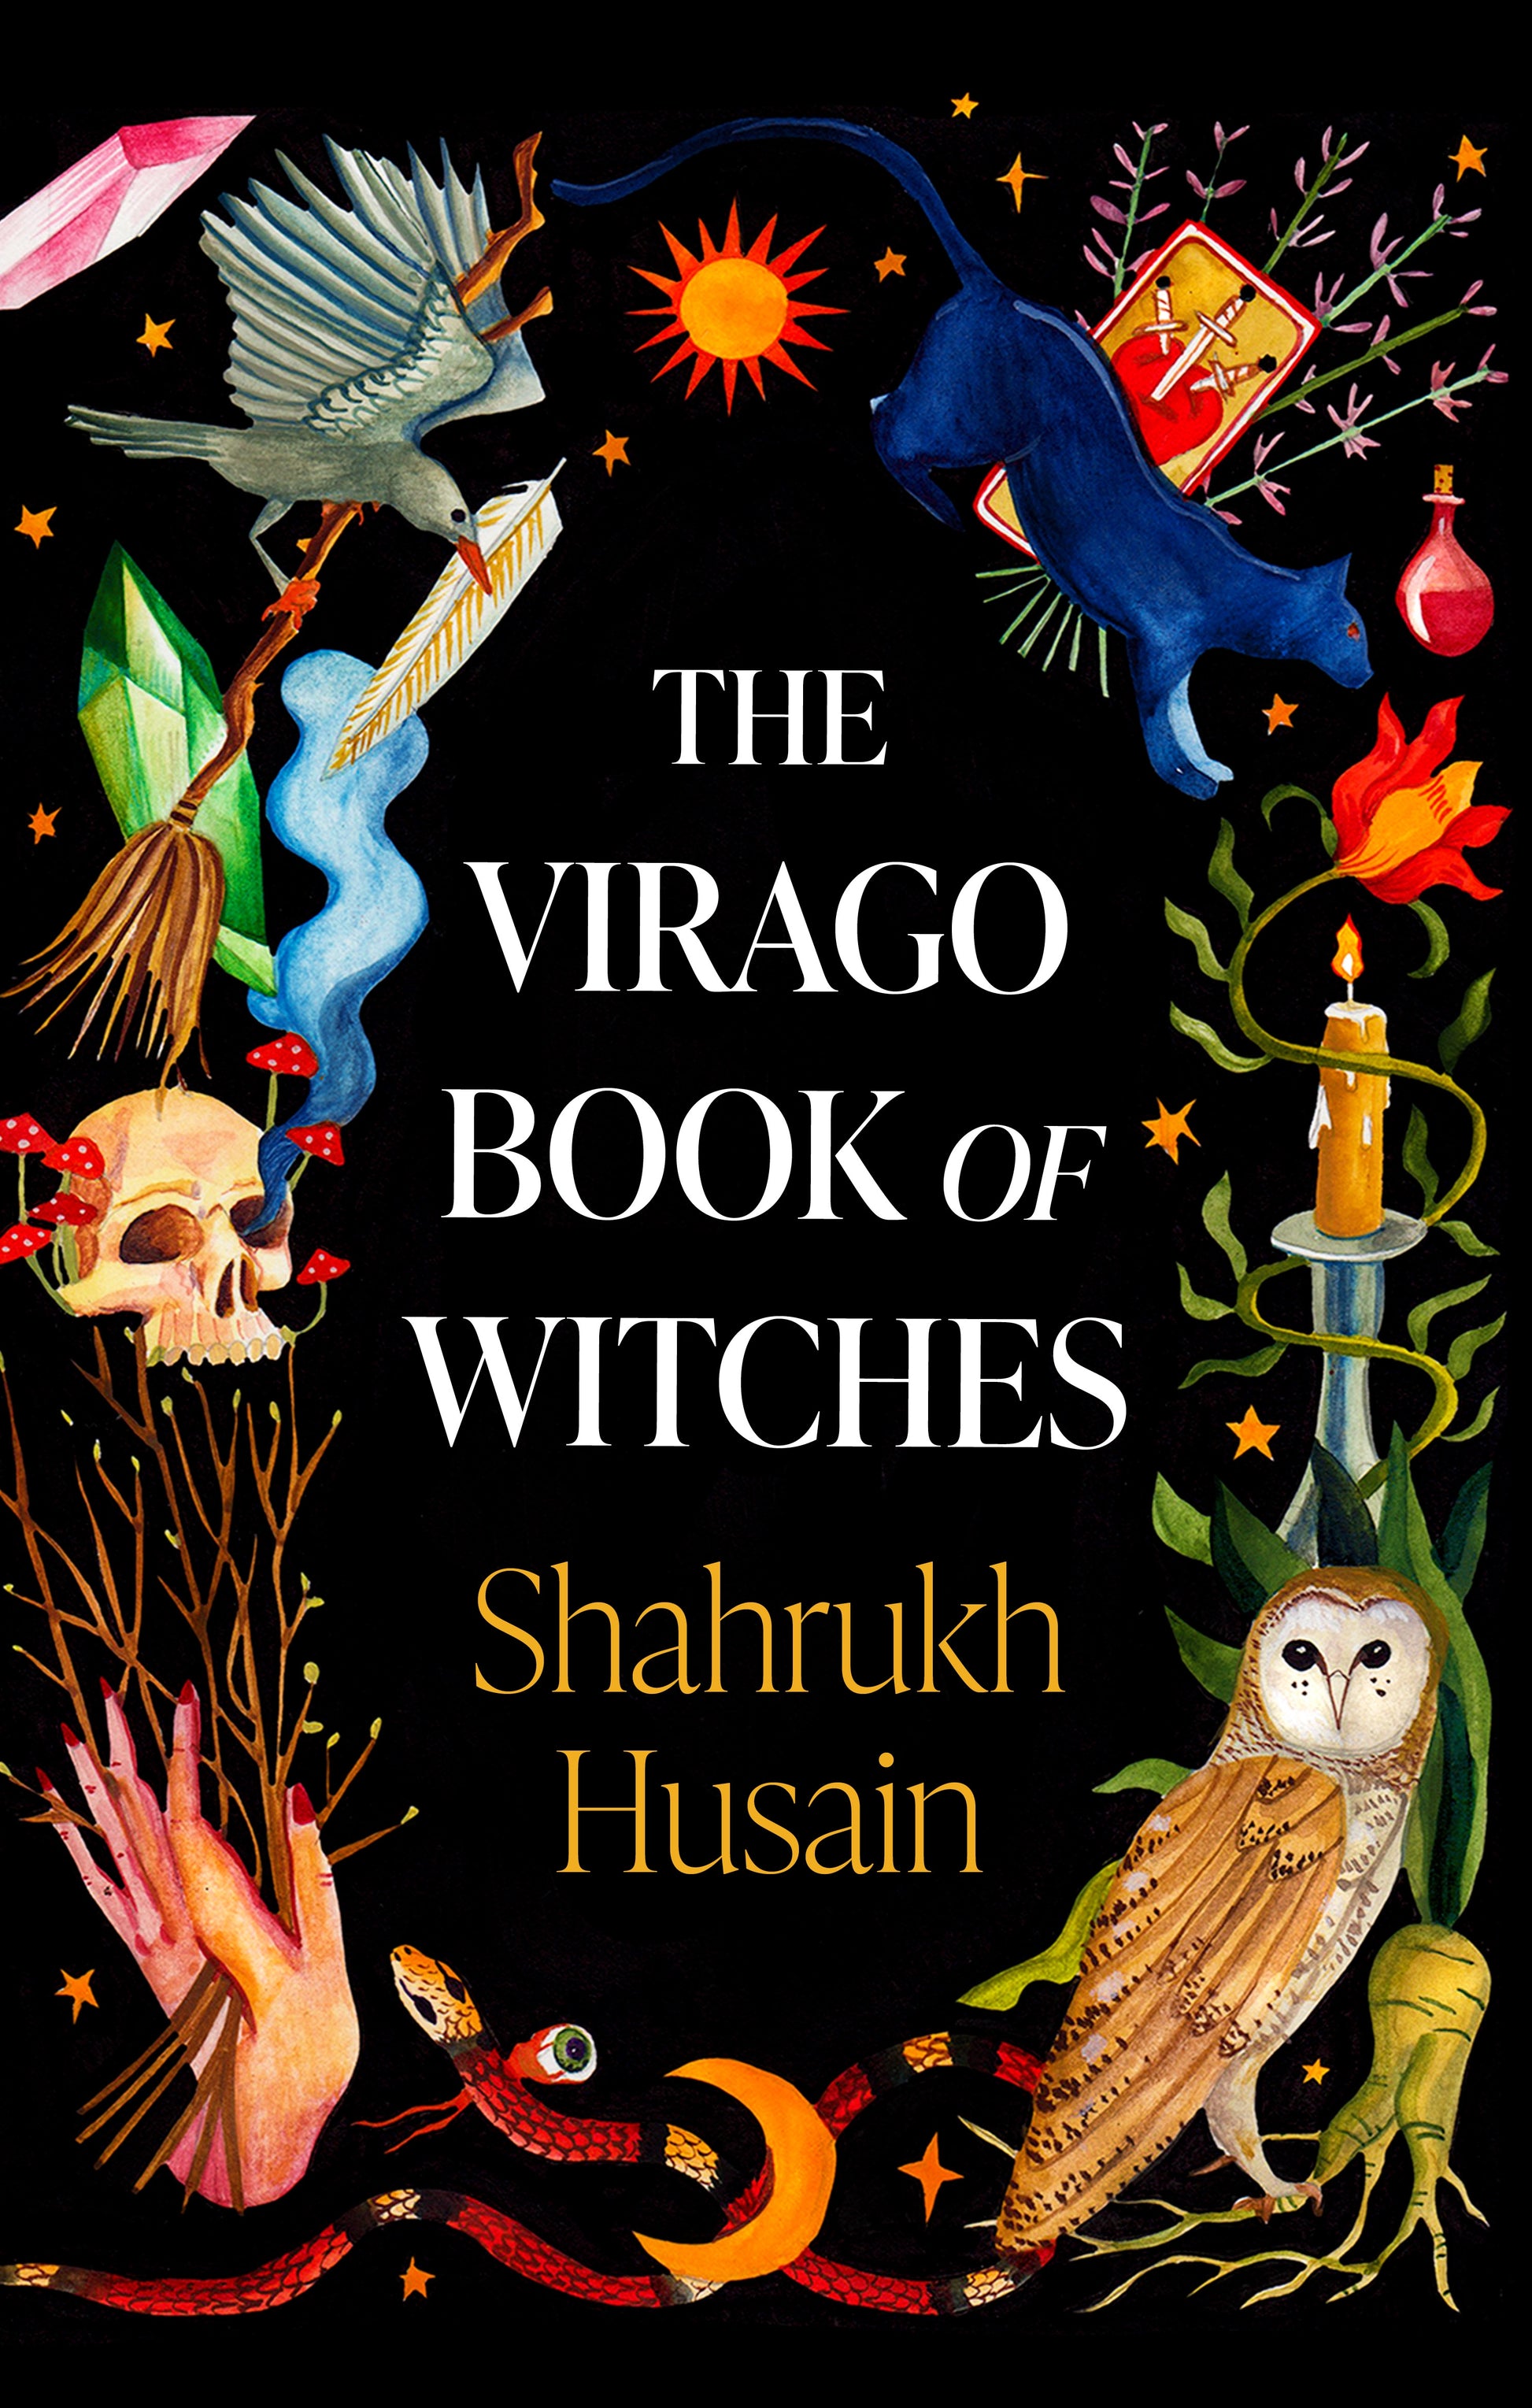 The Virago Book Of Witches by Shahrukh Husain